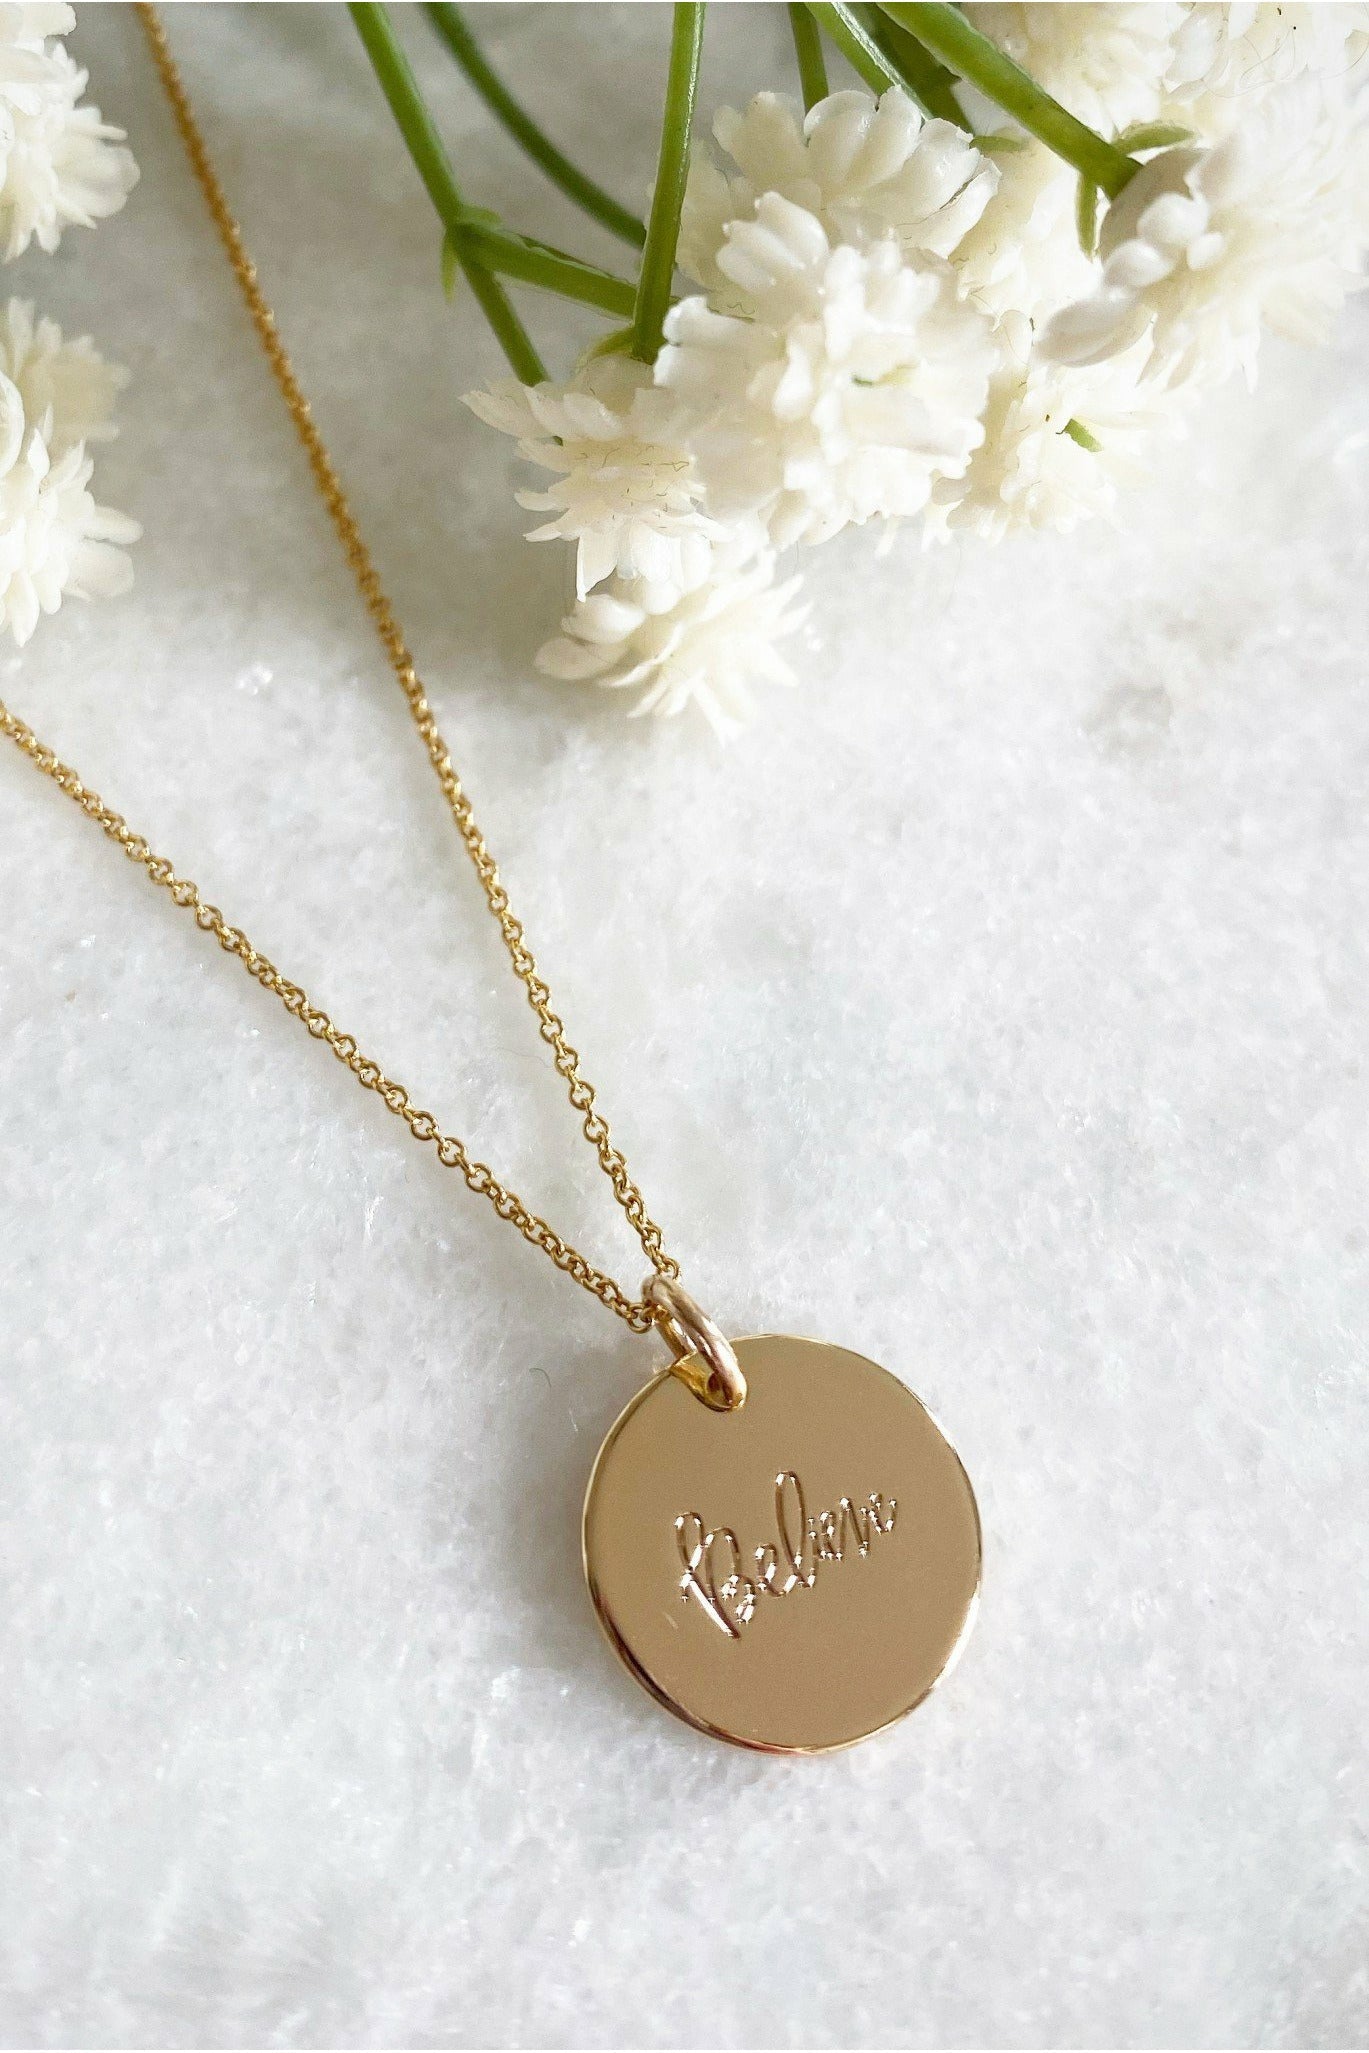 Believe Gold Coin Necklace Believe Gold Coin Necklace